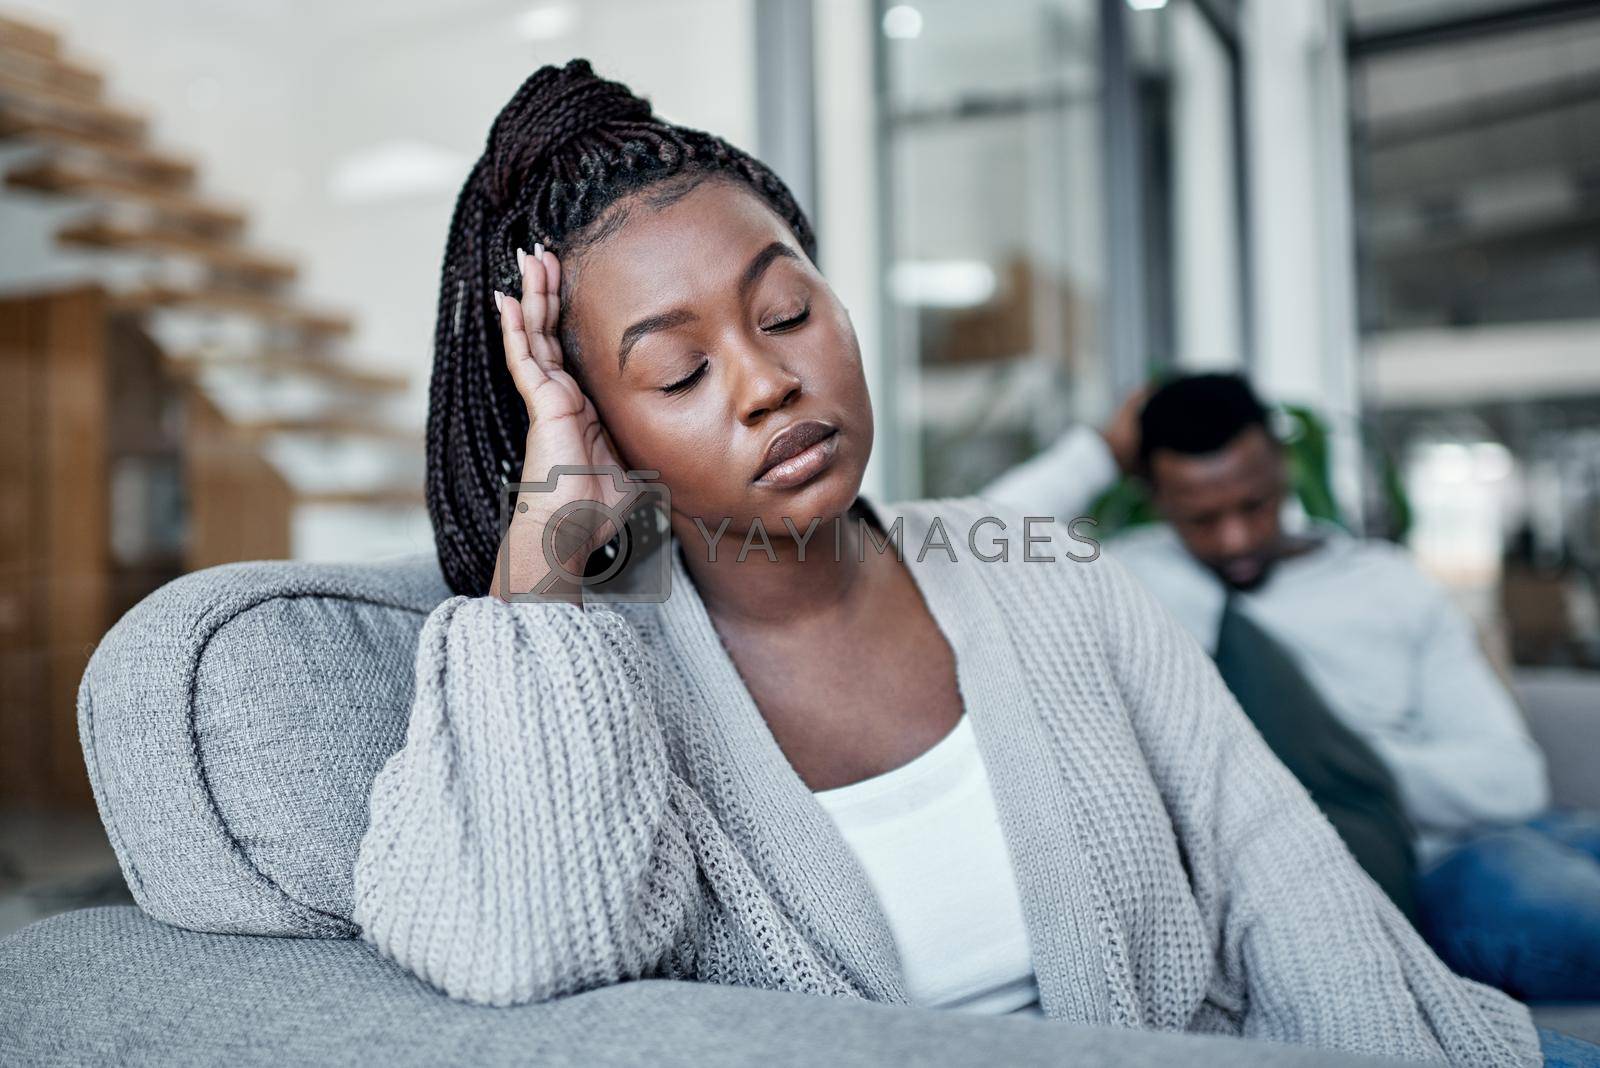 Royalty free image of Sad, frustrated and tired woman ignoring husband during a fight, argument and conflict about divorce, breakup and relationship problems. Unhappy, stressed and depressed wife feeling sad in a marriage by YuriArcurs